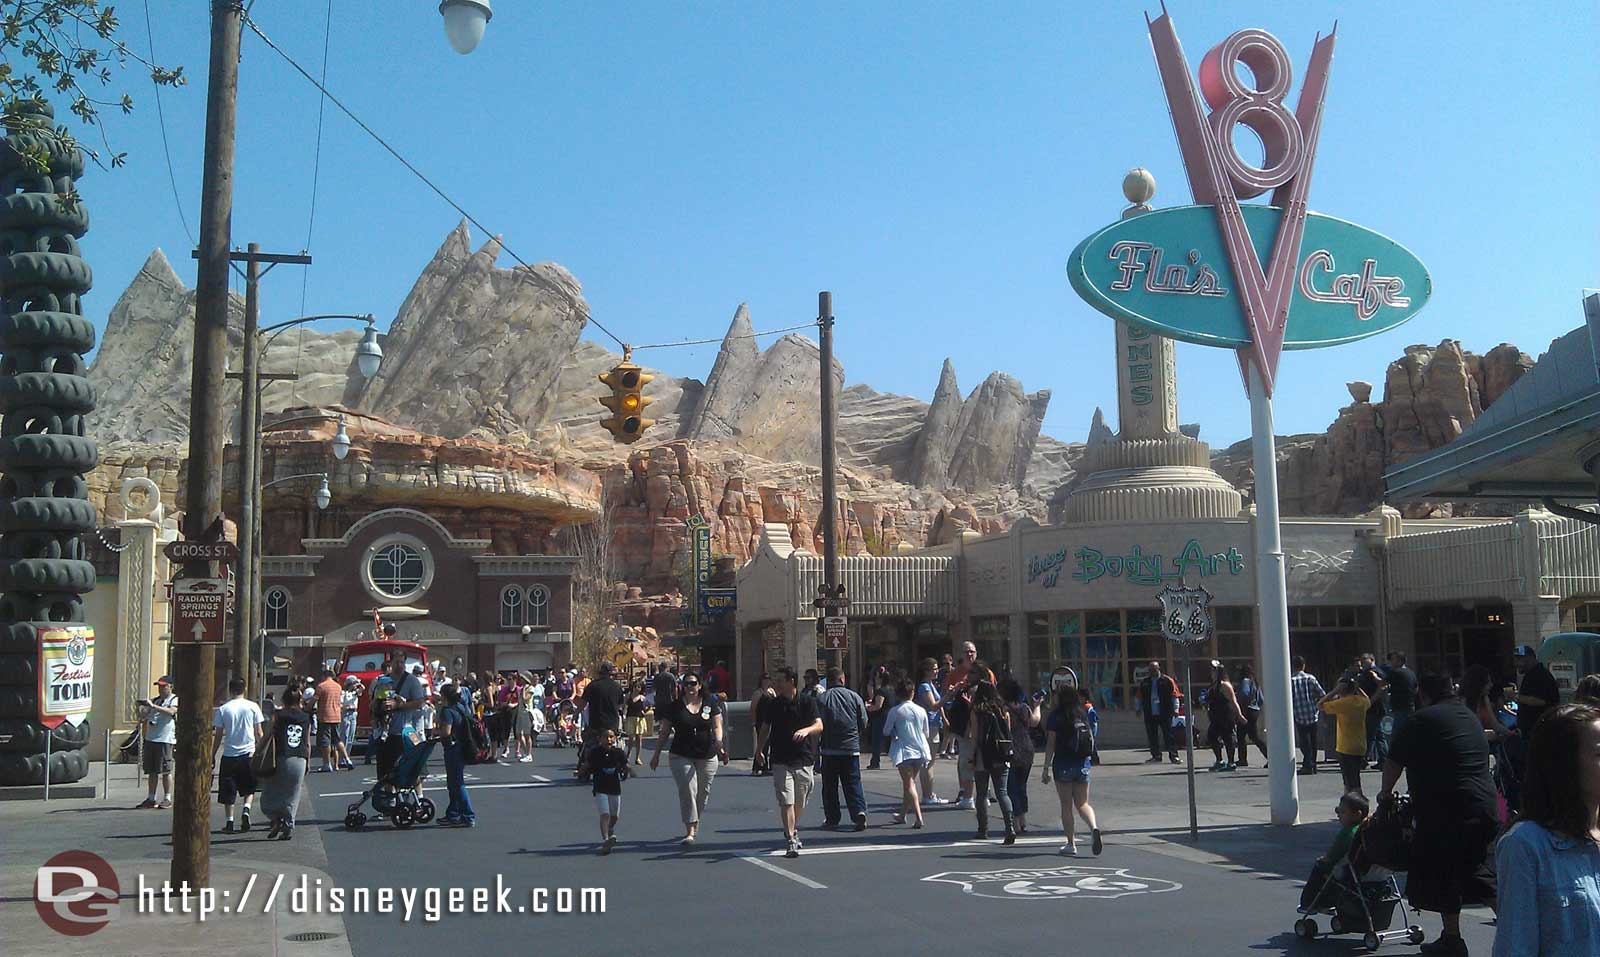 Route 66 at Cross St in CarsLand